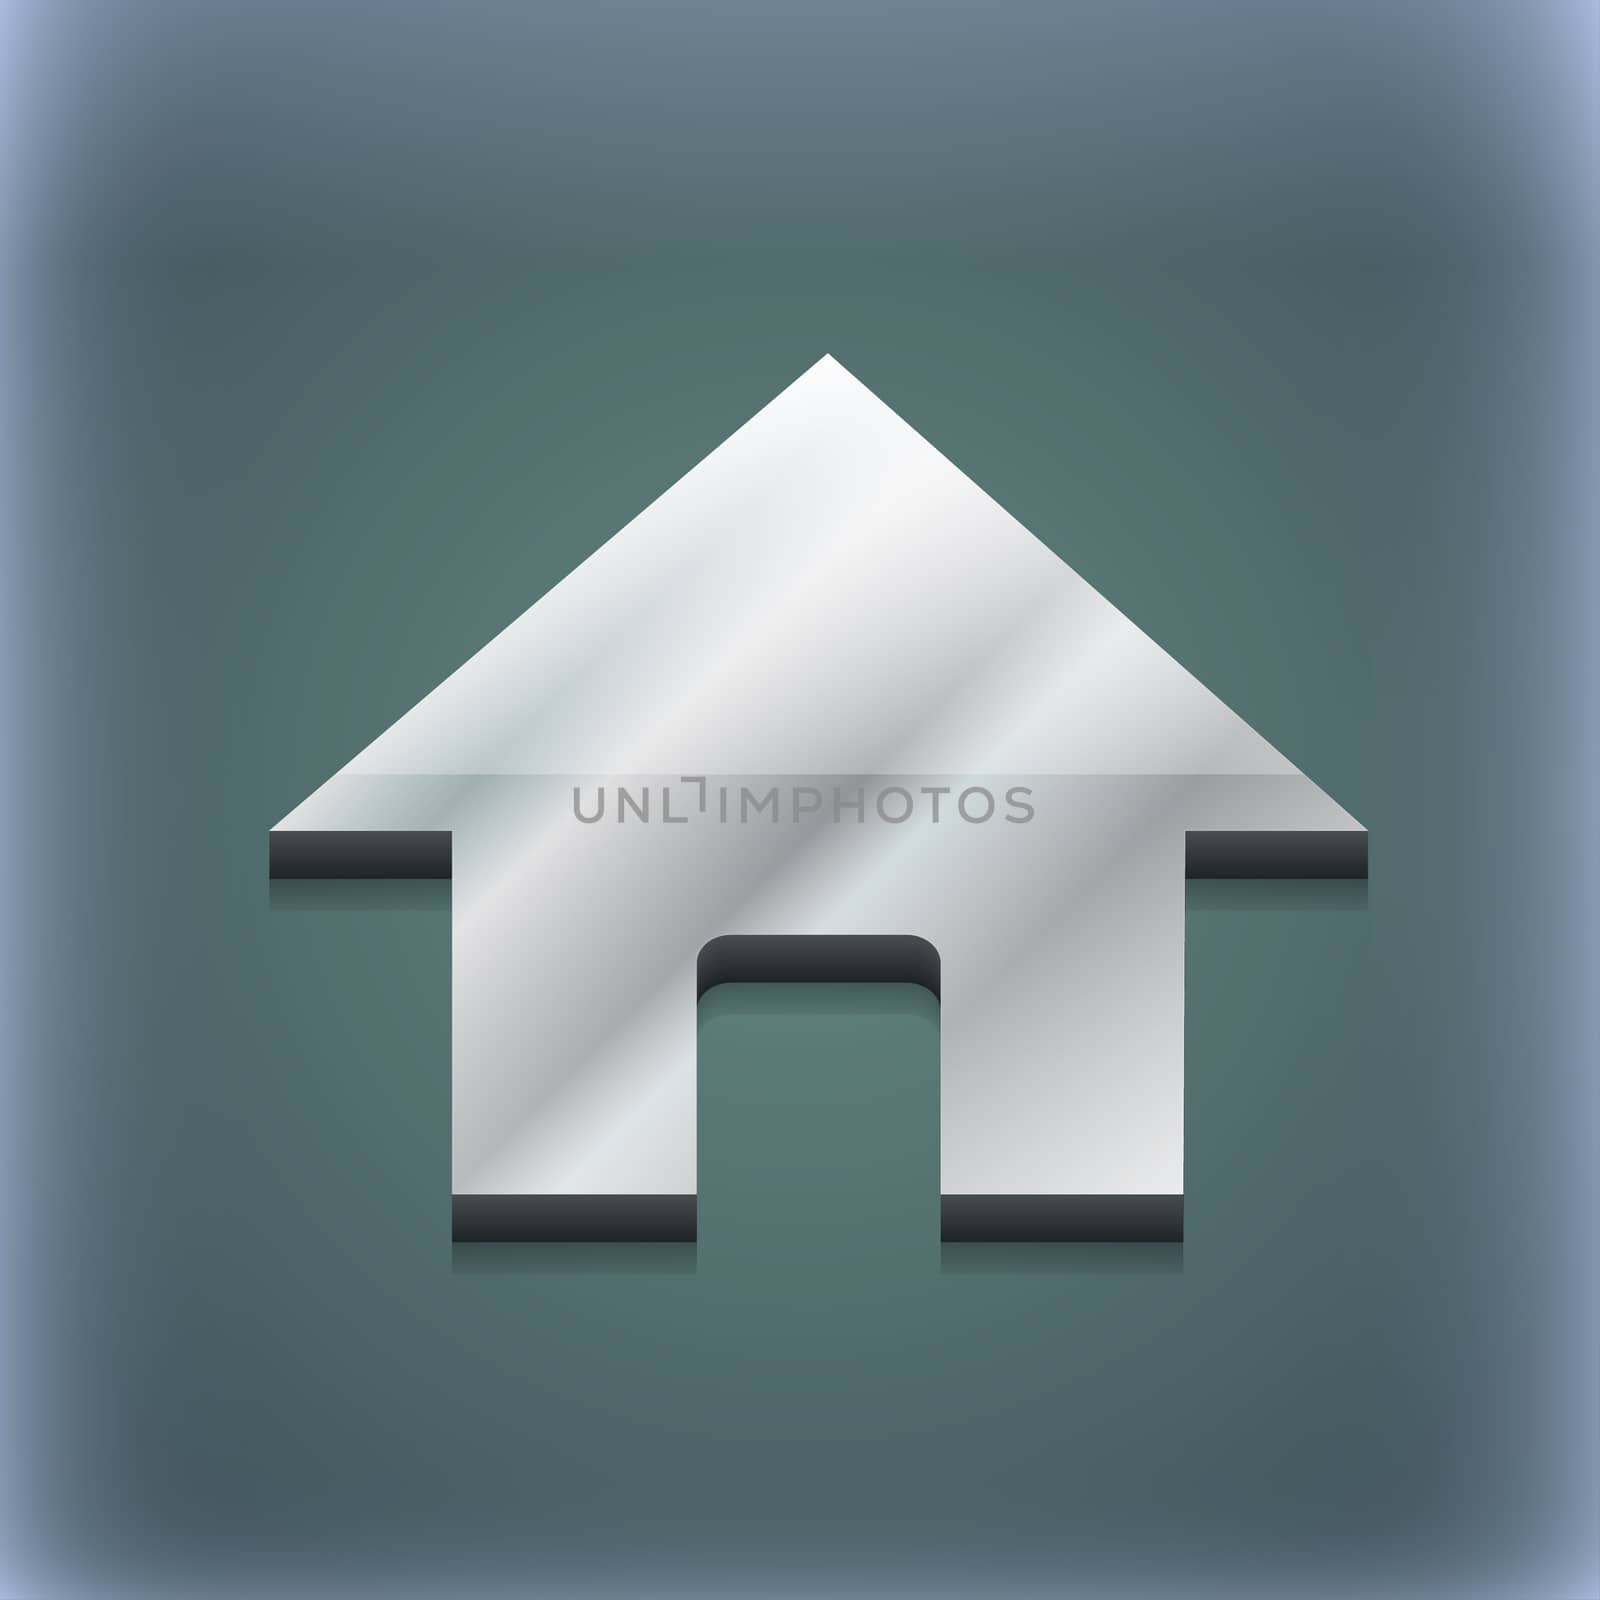 Home, Main page icon symbol. 3D style. Trendy, modern design with space for your text illustration. Raster version